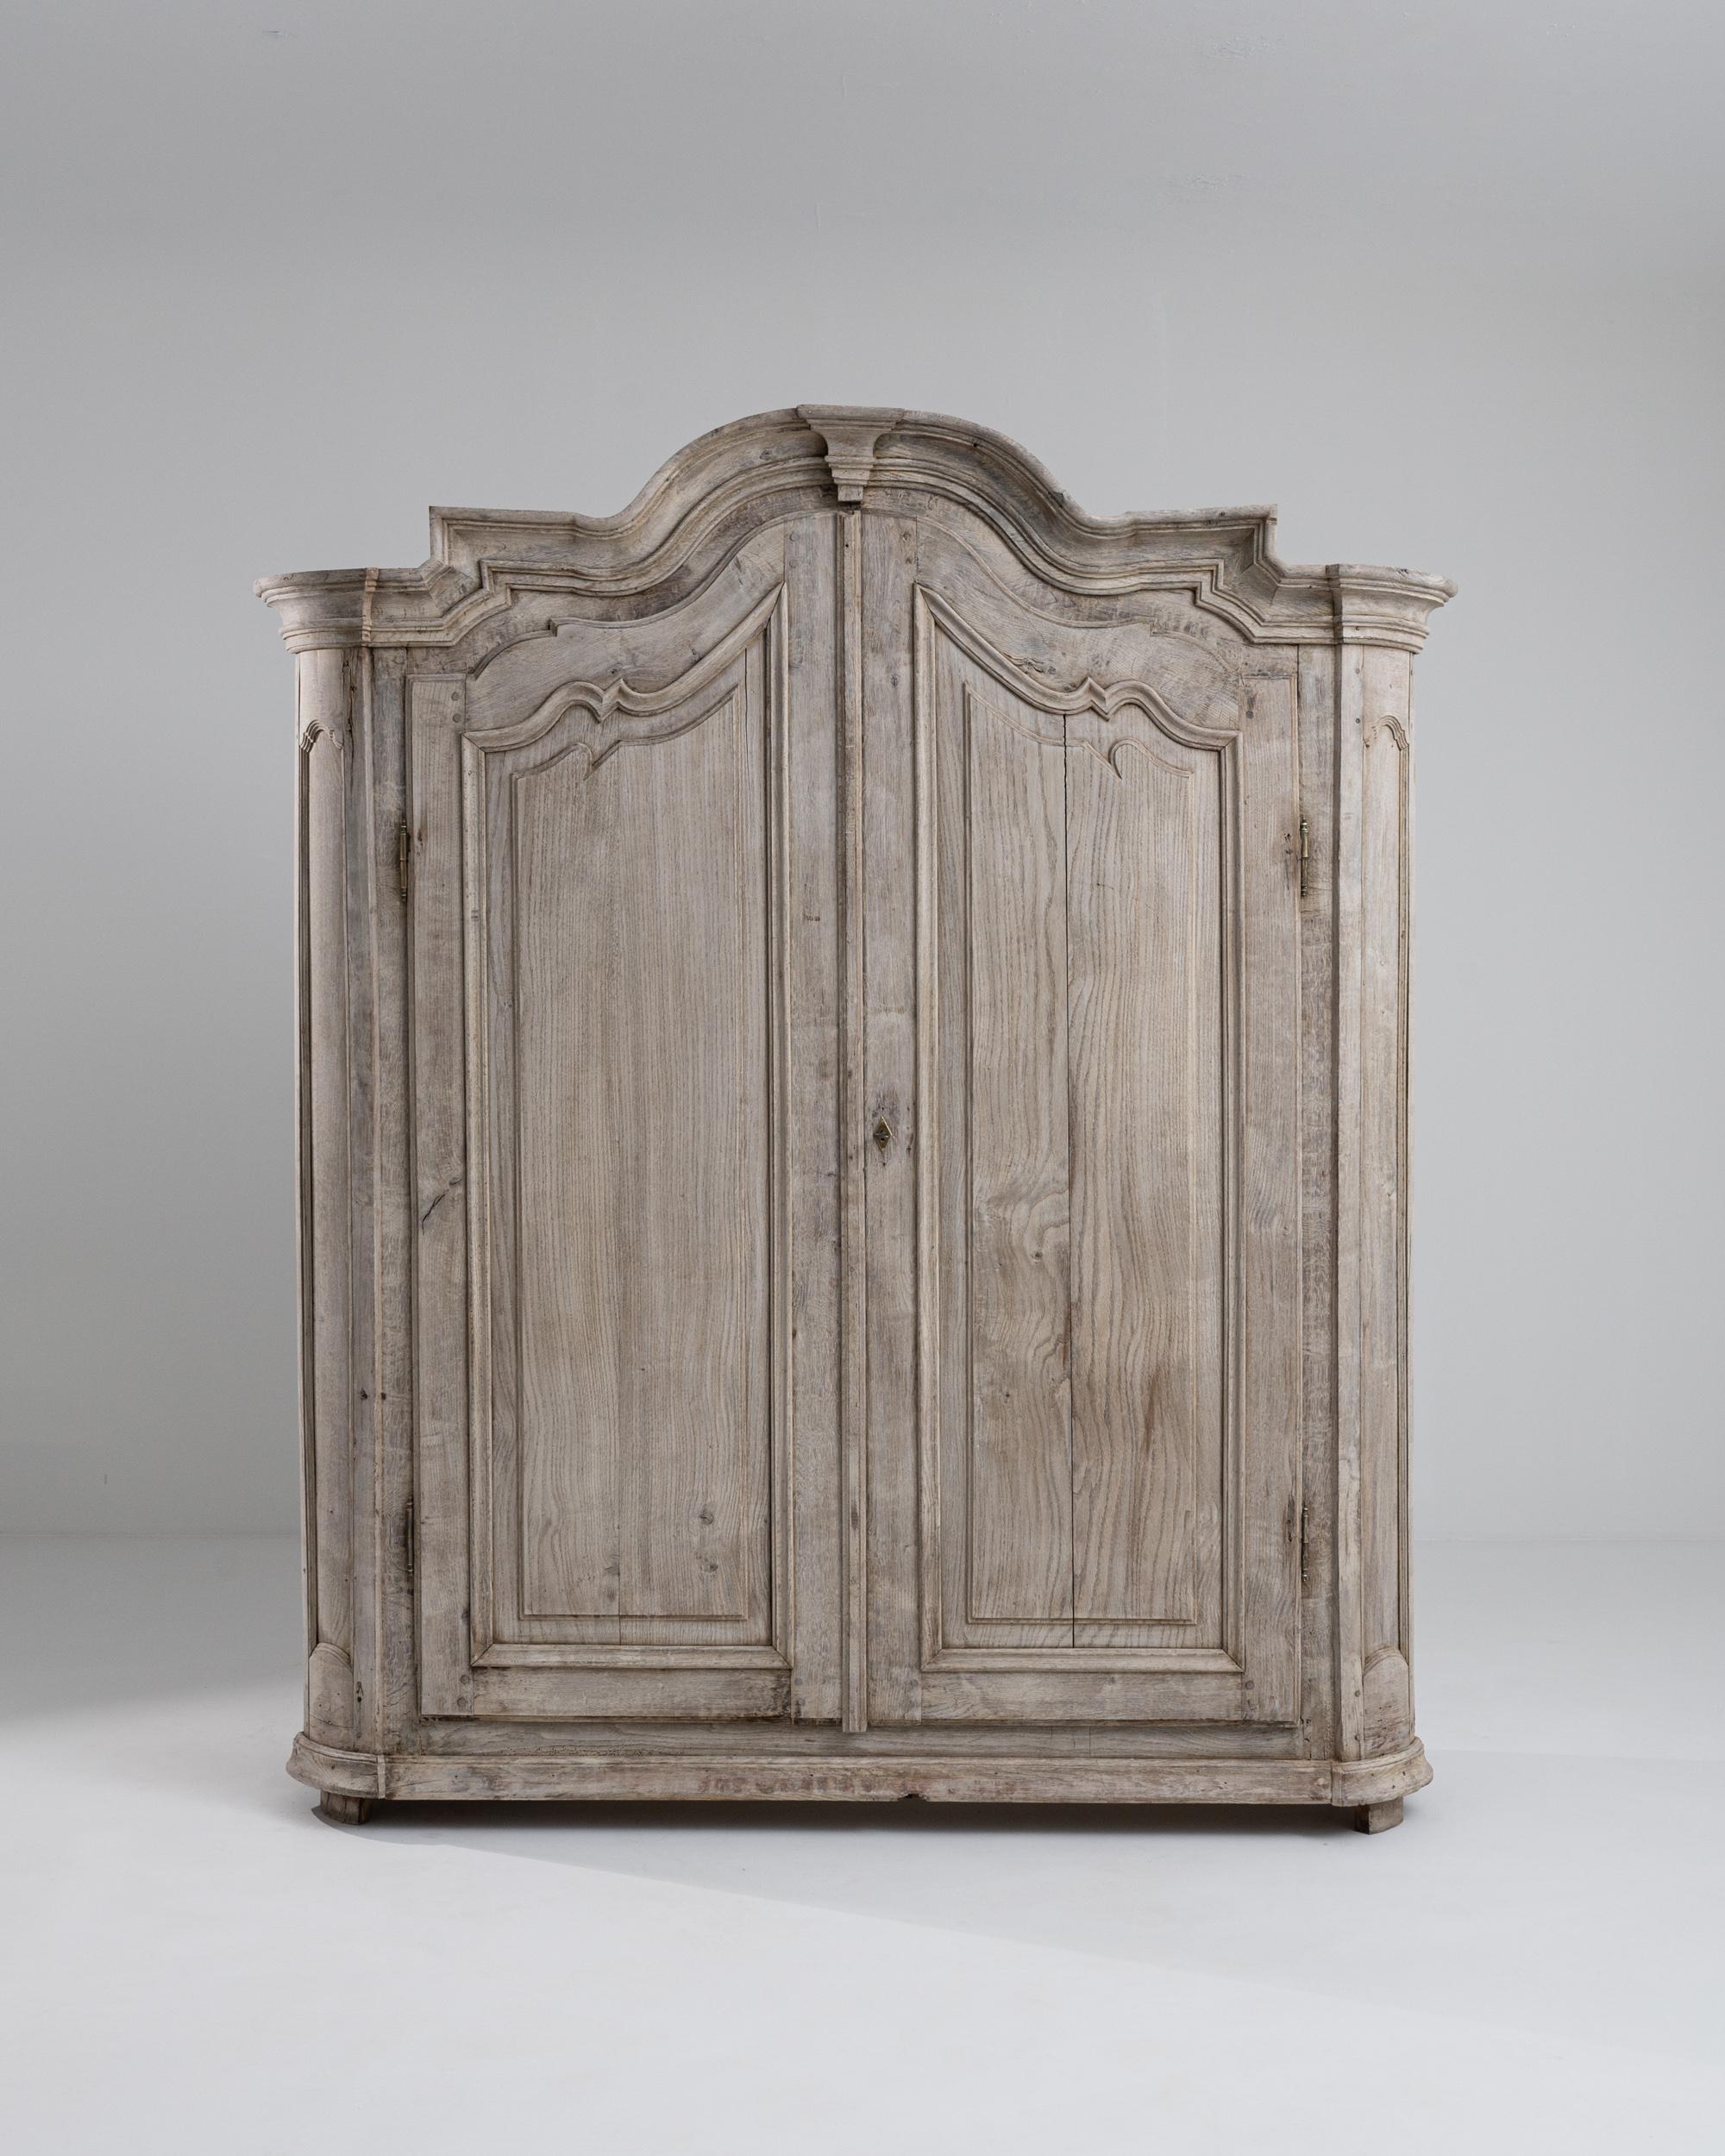 A wooden cabinet from 1800s France. This hulking wooden cabinet stands at seven feet high, its top molded edge carved into compelling angles and curves, almost like the roof of a gothic church. Oak construction has been painstakingly hand-chiseled,